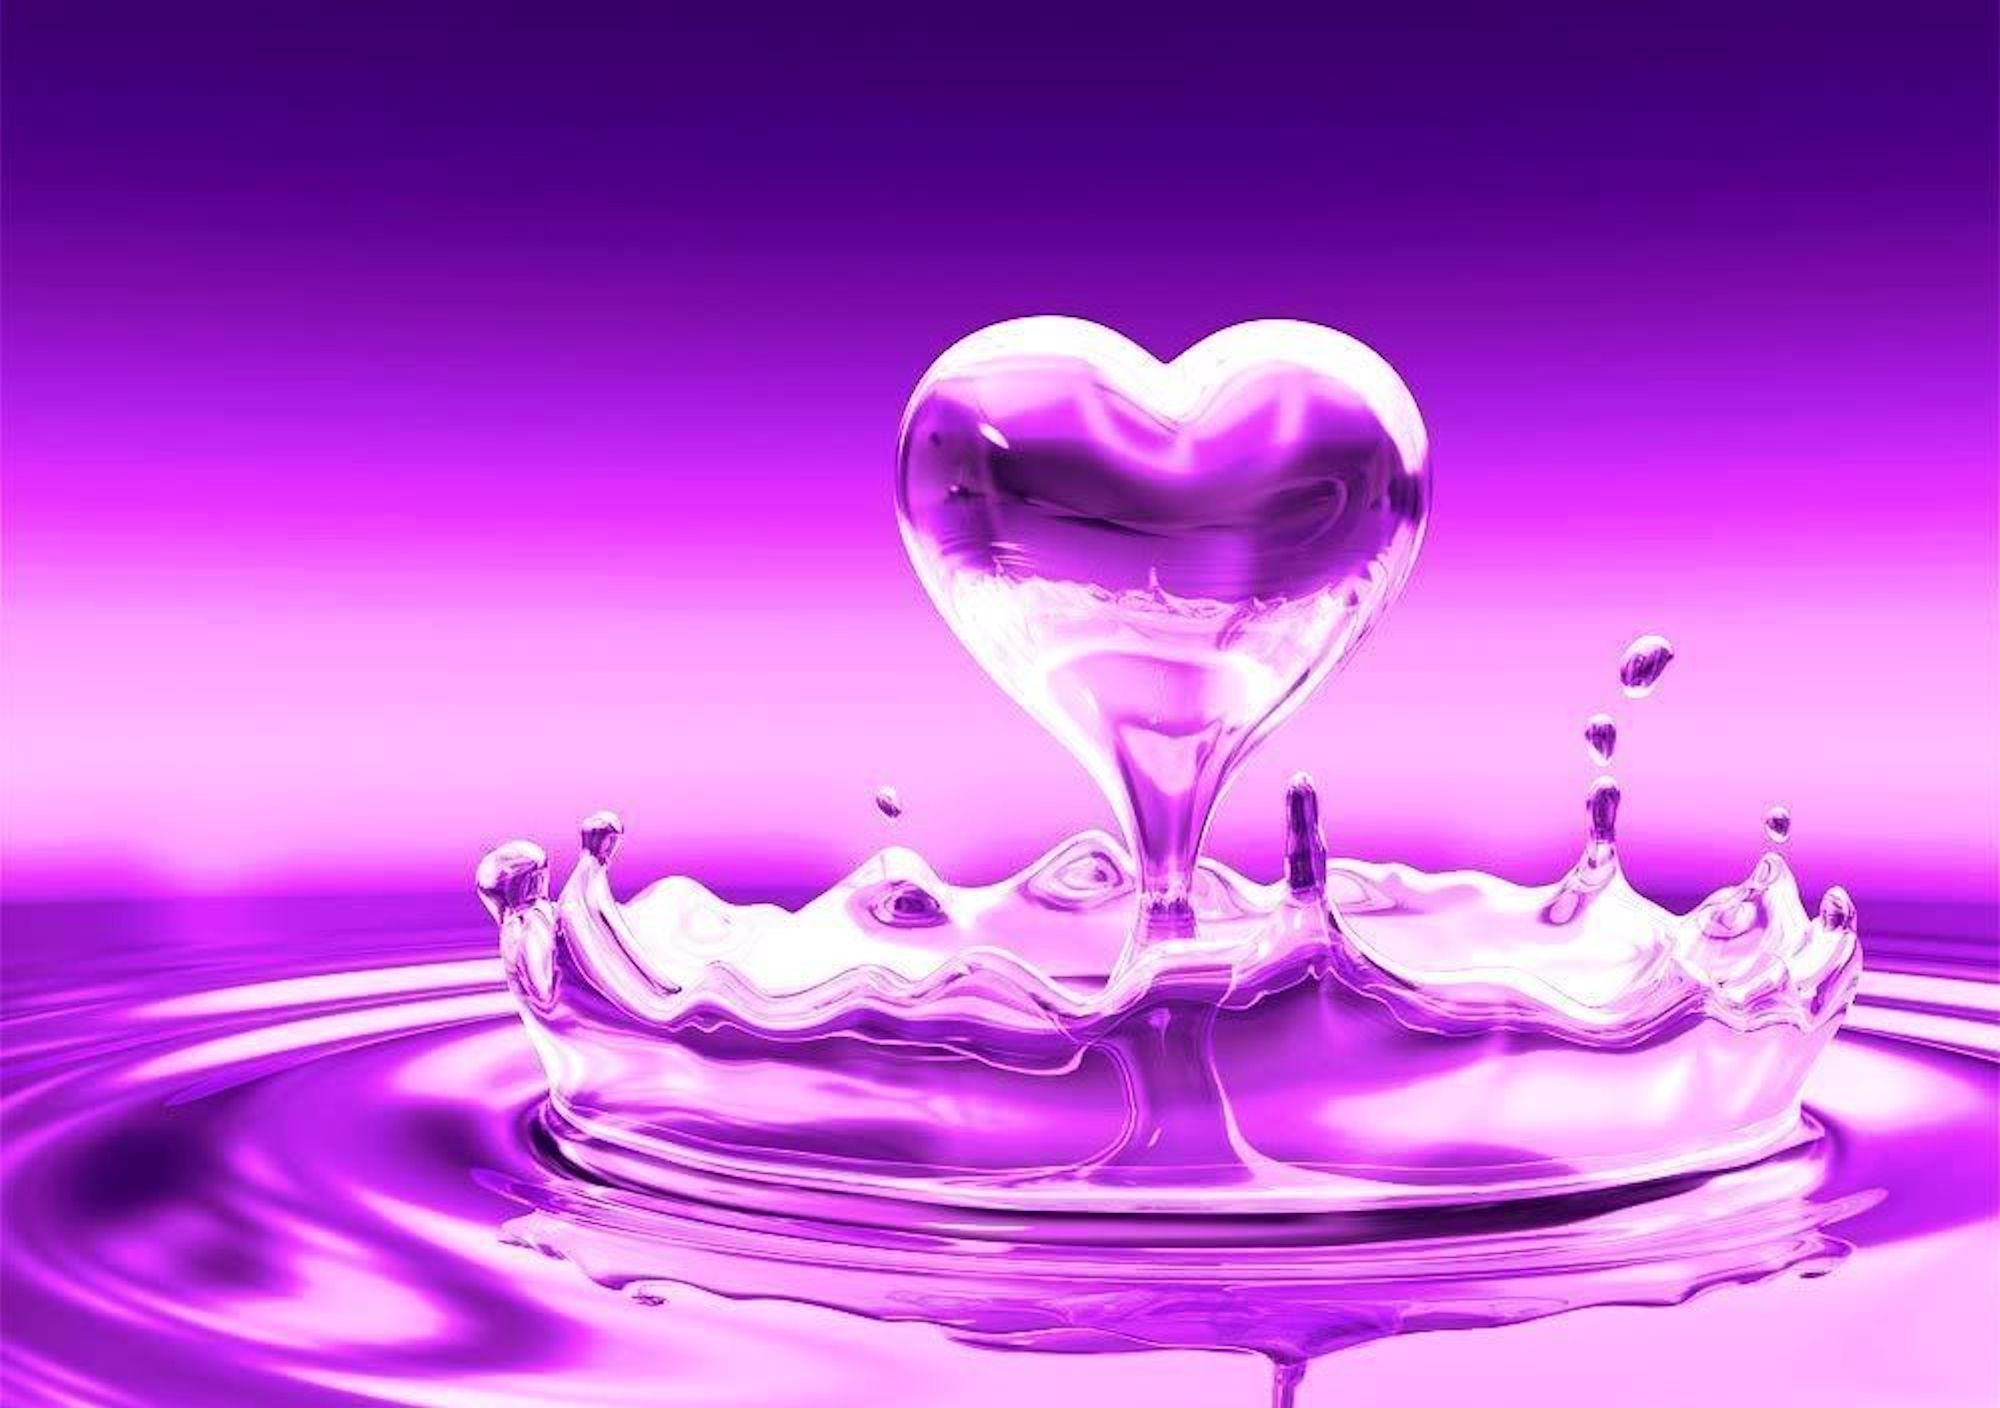 Purple Hearts Wallpaper Images | Free Photos, PNG Stickers, Wallpapers &  Backgrounds - rawpixel